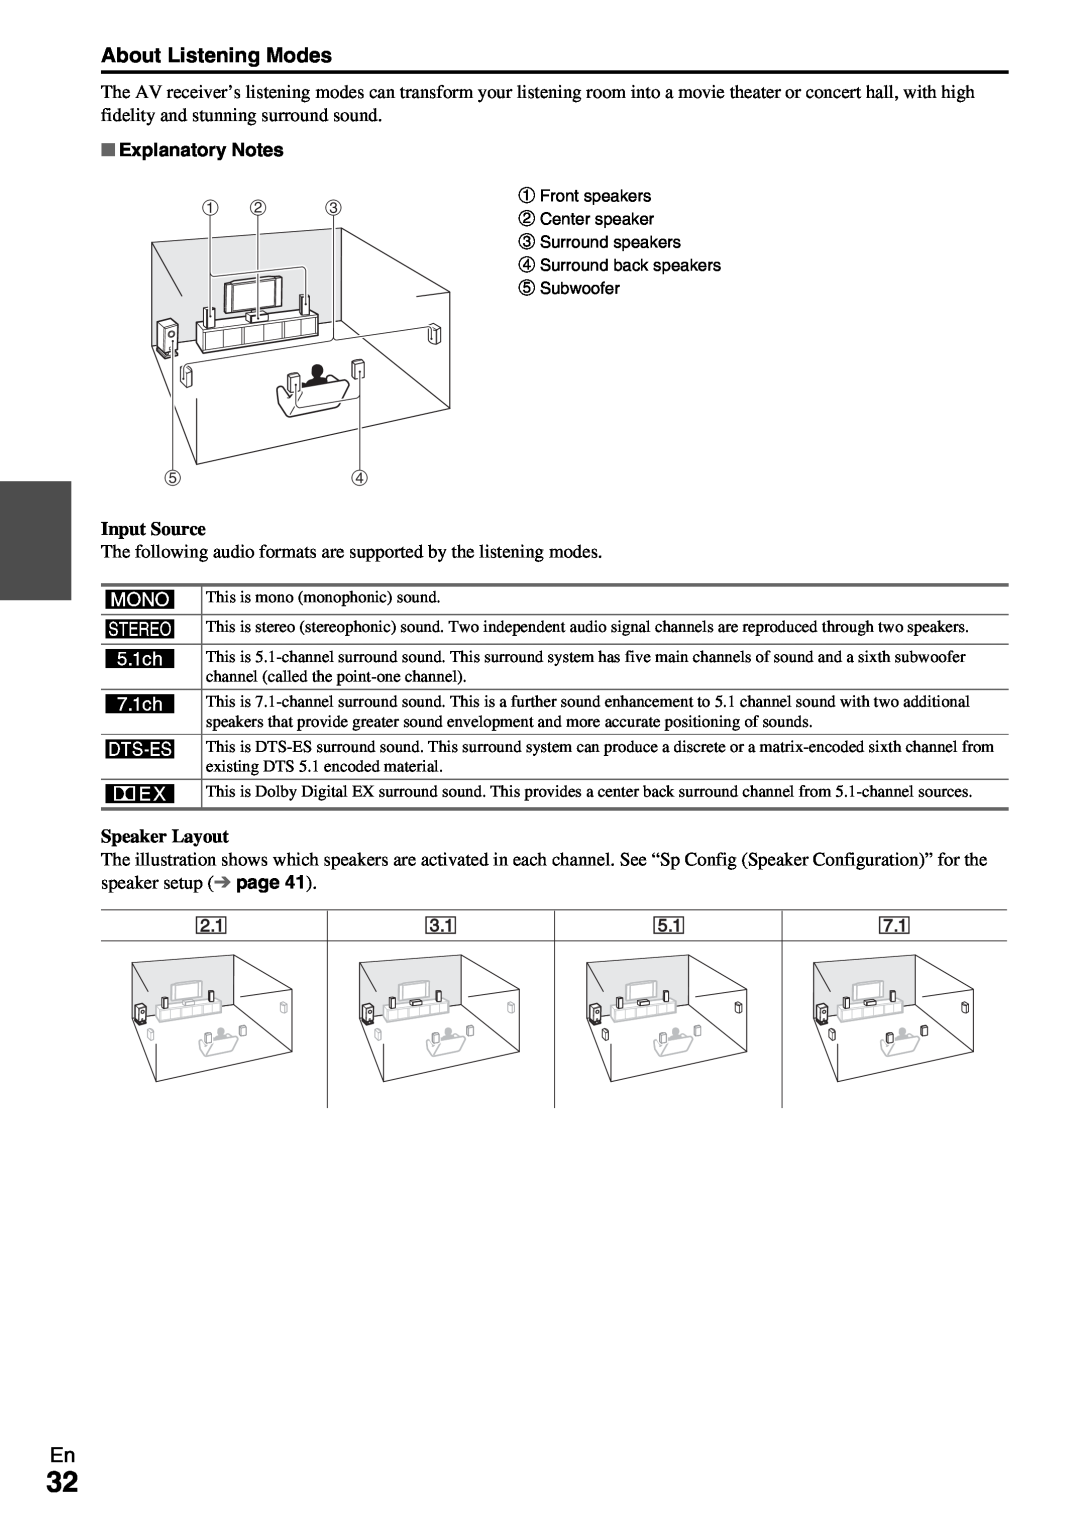 Onkyo TX-NR509 instruction manual About Listening Modes, Explanatory Notes 